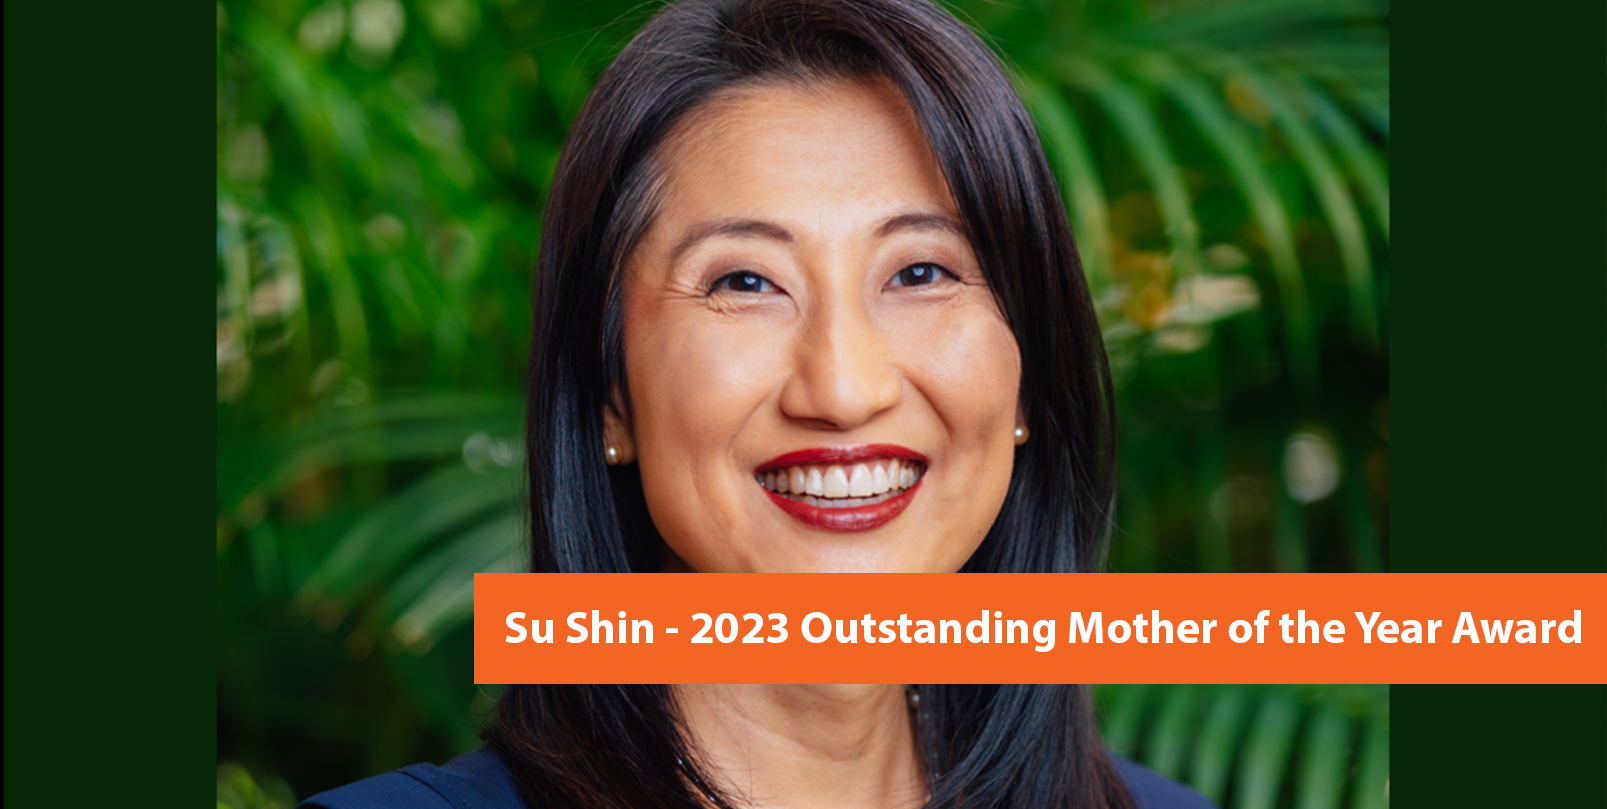 Su Shin 2023 Outstanding Mother of the Year Award